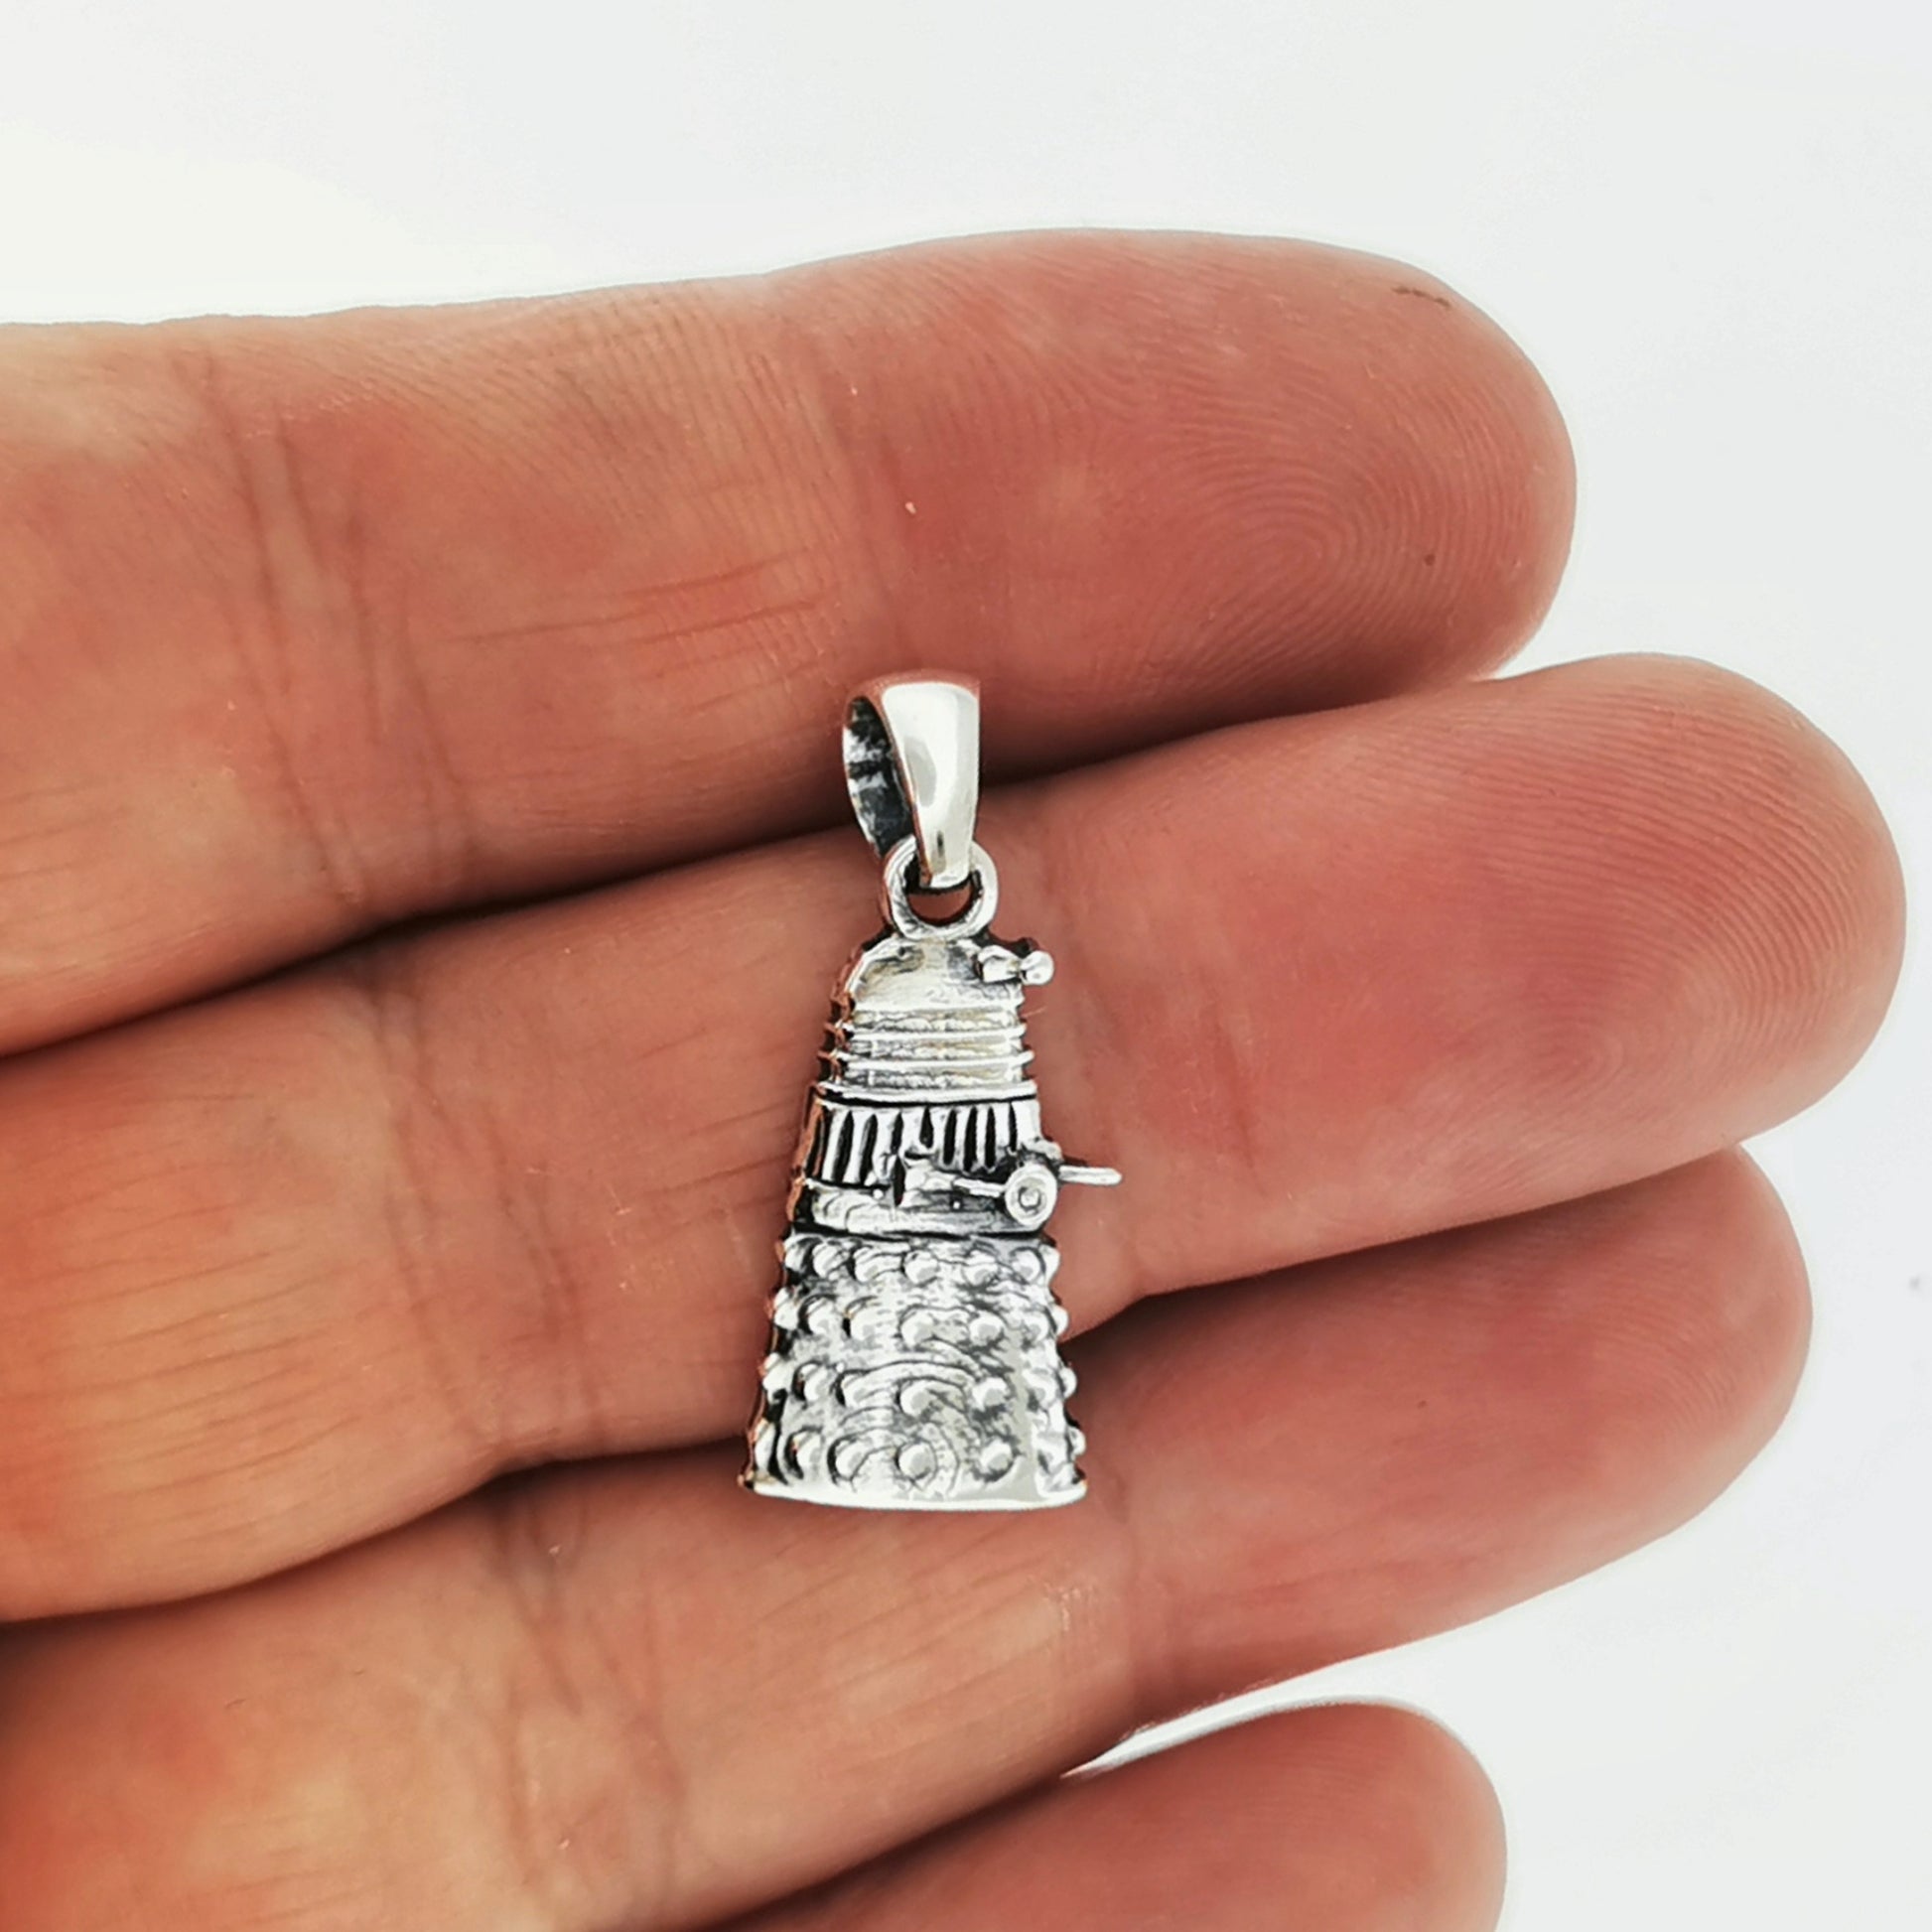 Gold Dr Who Dalek Charm Pendant, Dr Who Pendant, Exterminate Pendant, Geeky Jewelry Gifts, Dr Who Jewelry, Gold Dalek Jewellery, Sci Fi Charm, Sci-Fi Jewelry, Gold Sci Fi Pendant, Dr Who Dalek Pendant, Gold Dalek Pendant, Geeky Gold Pendant